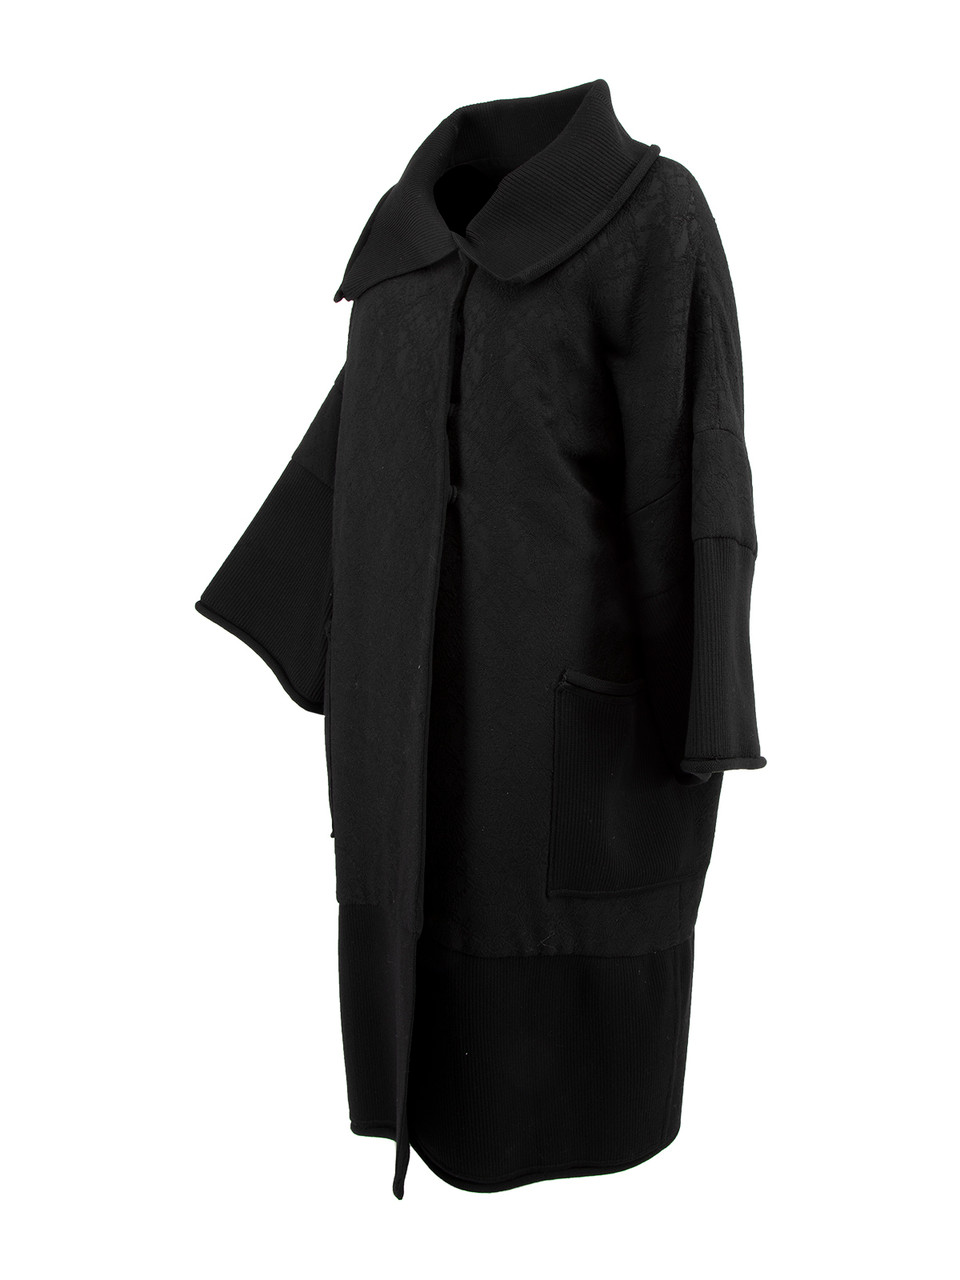 Christian Dior Vintage Wool and Cashmere Coat